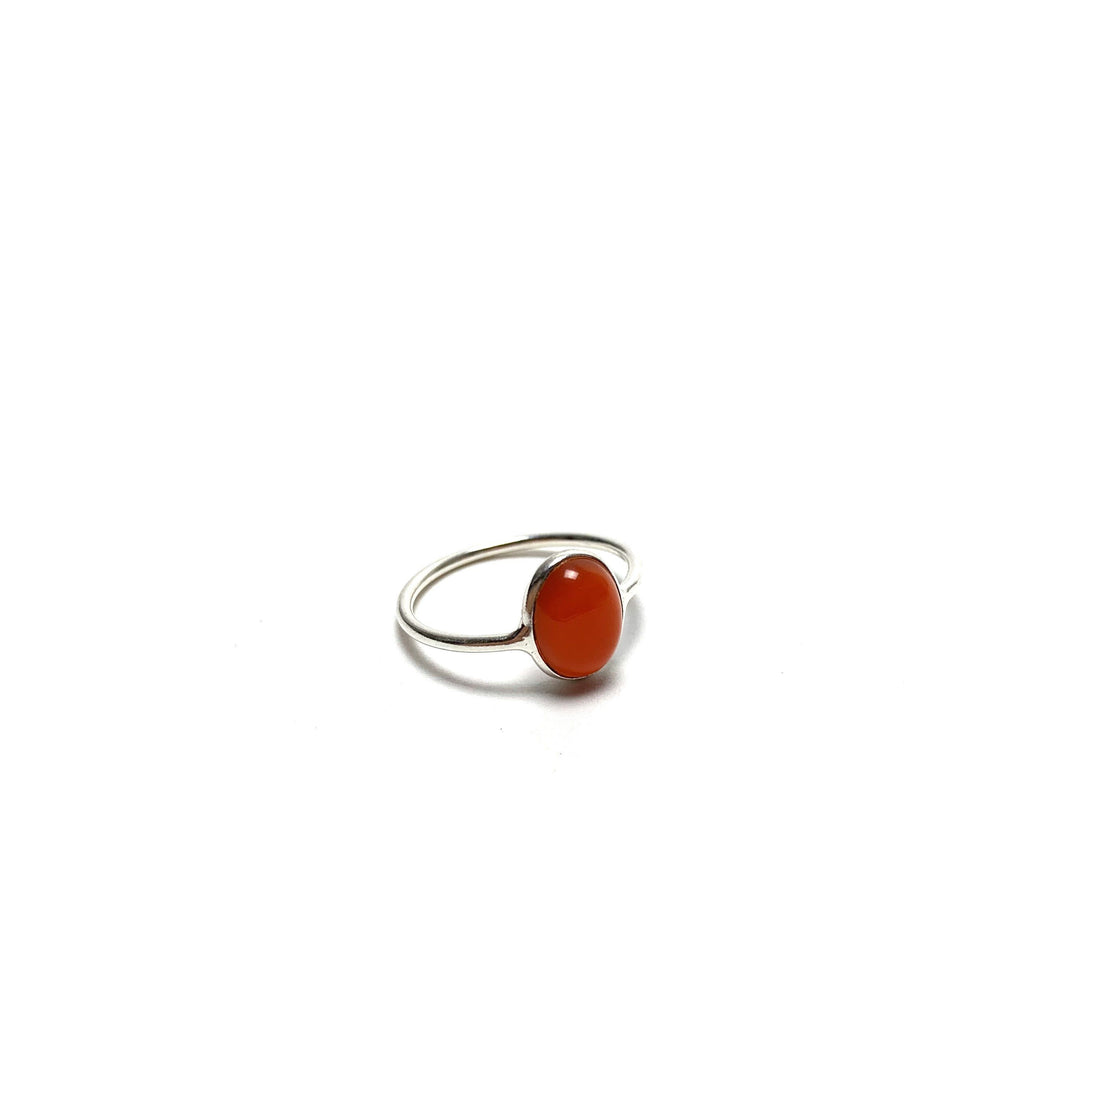 Carnelian Silver Ring Rings Crystals D. $18.00 Size 5 